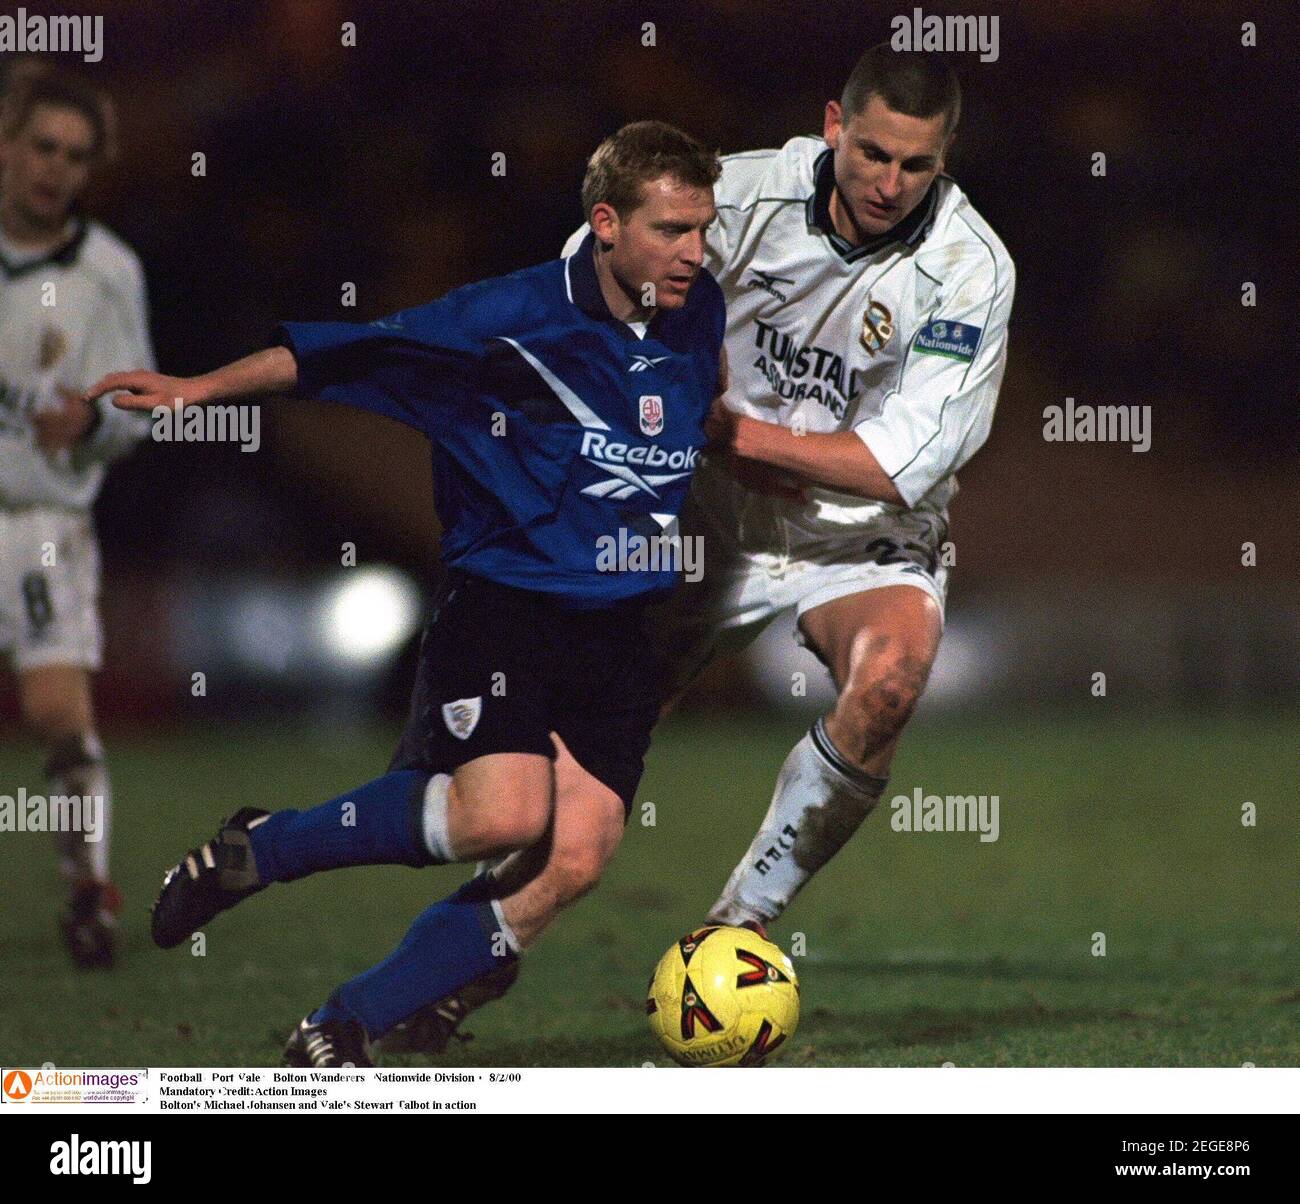 Football - Port Vale v Bolton Wanderers , Nationwide Division 1  8/2/00  Mandatory Credit:Action Images  Bolton's Michael Johansen and Vale's Stewart Talbot in action Stock Photo